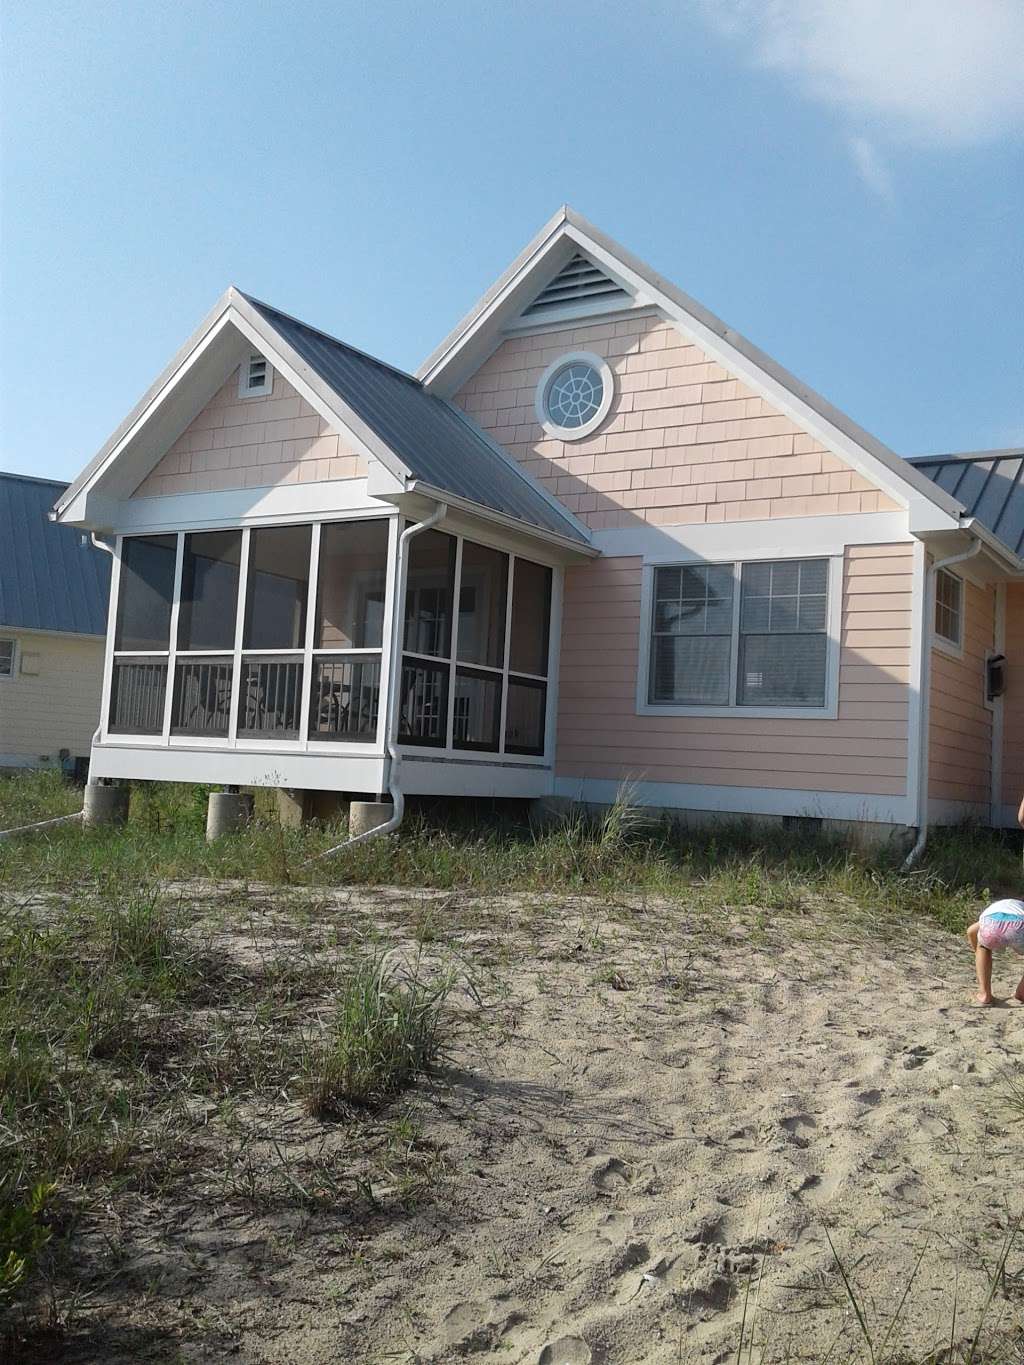 indian river inlet cottages | 39415 Inlet Rd, Bethany Beach, DE 19930 | Phone: (717) 407-0481